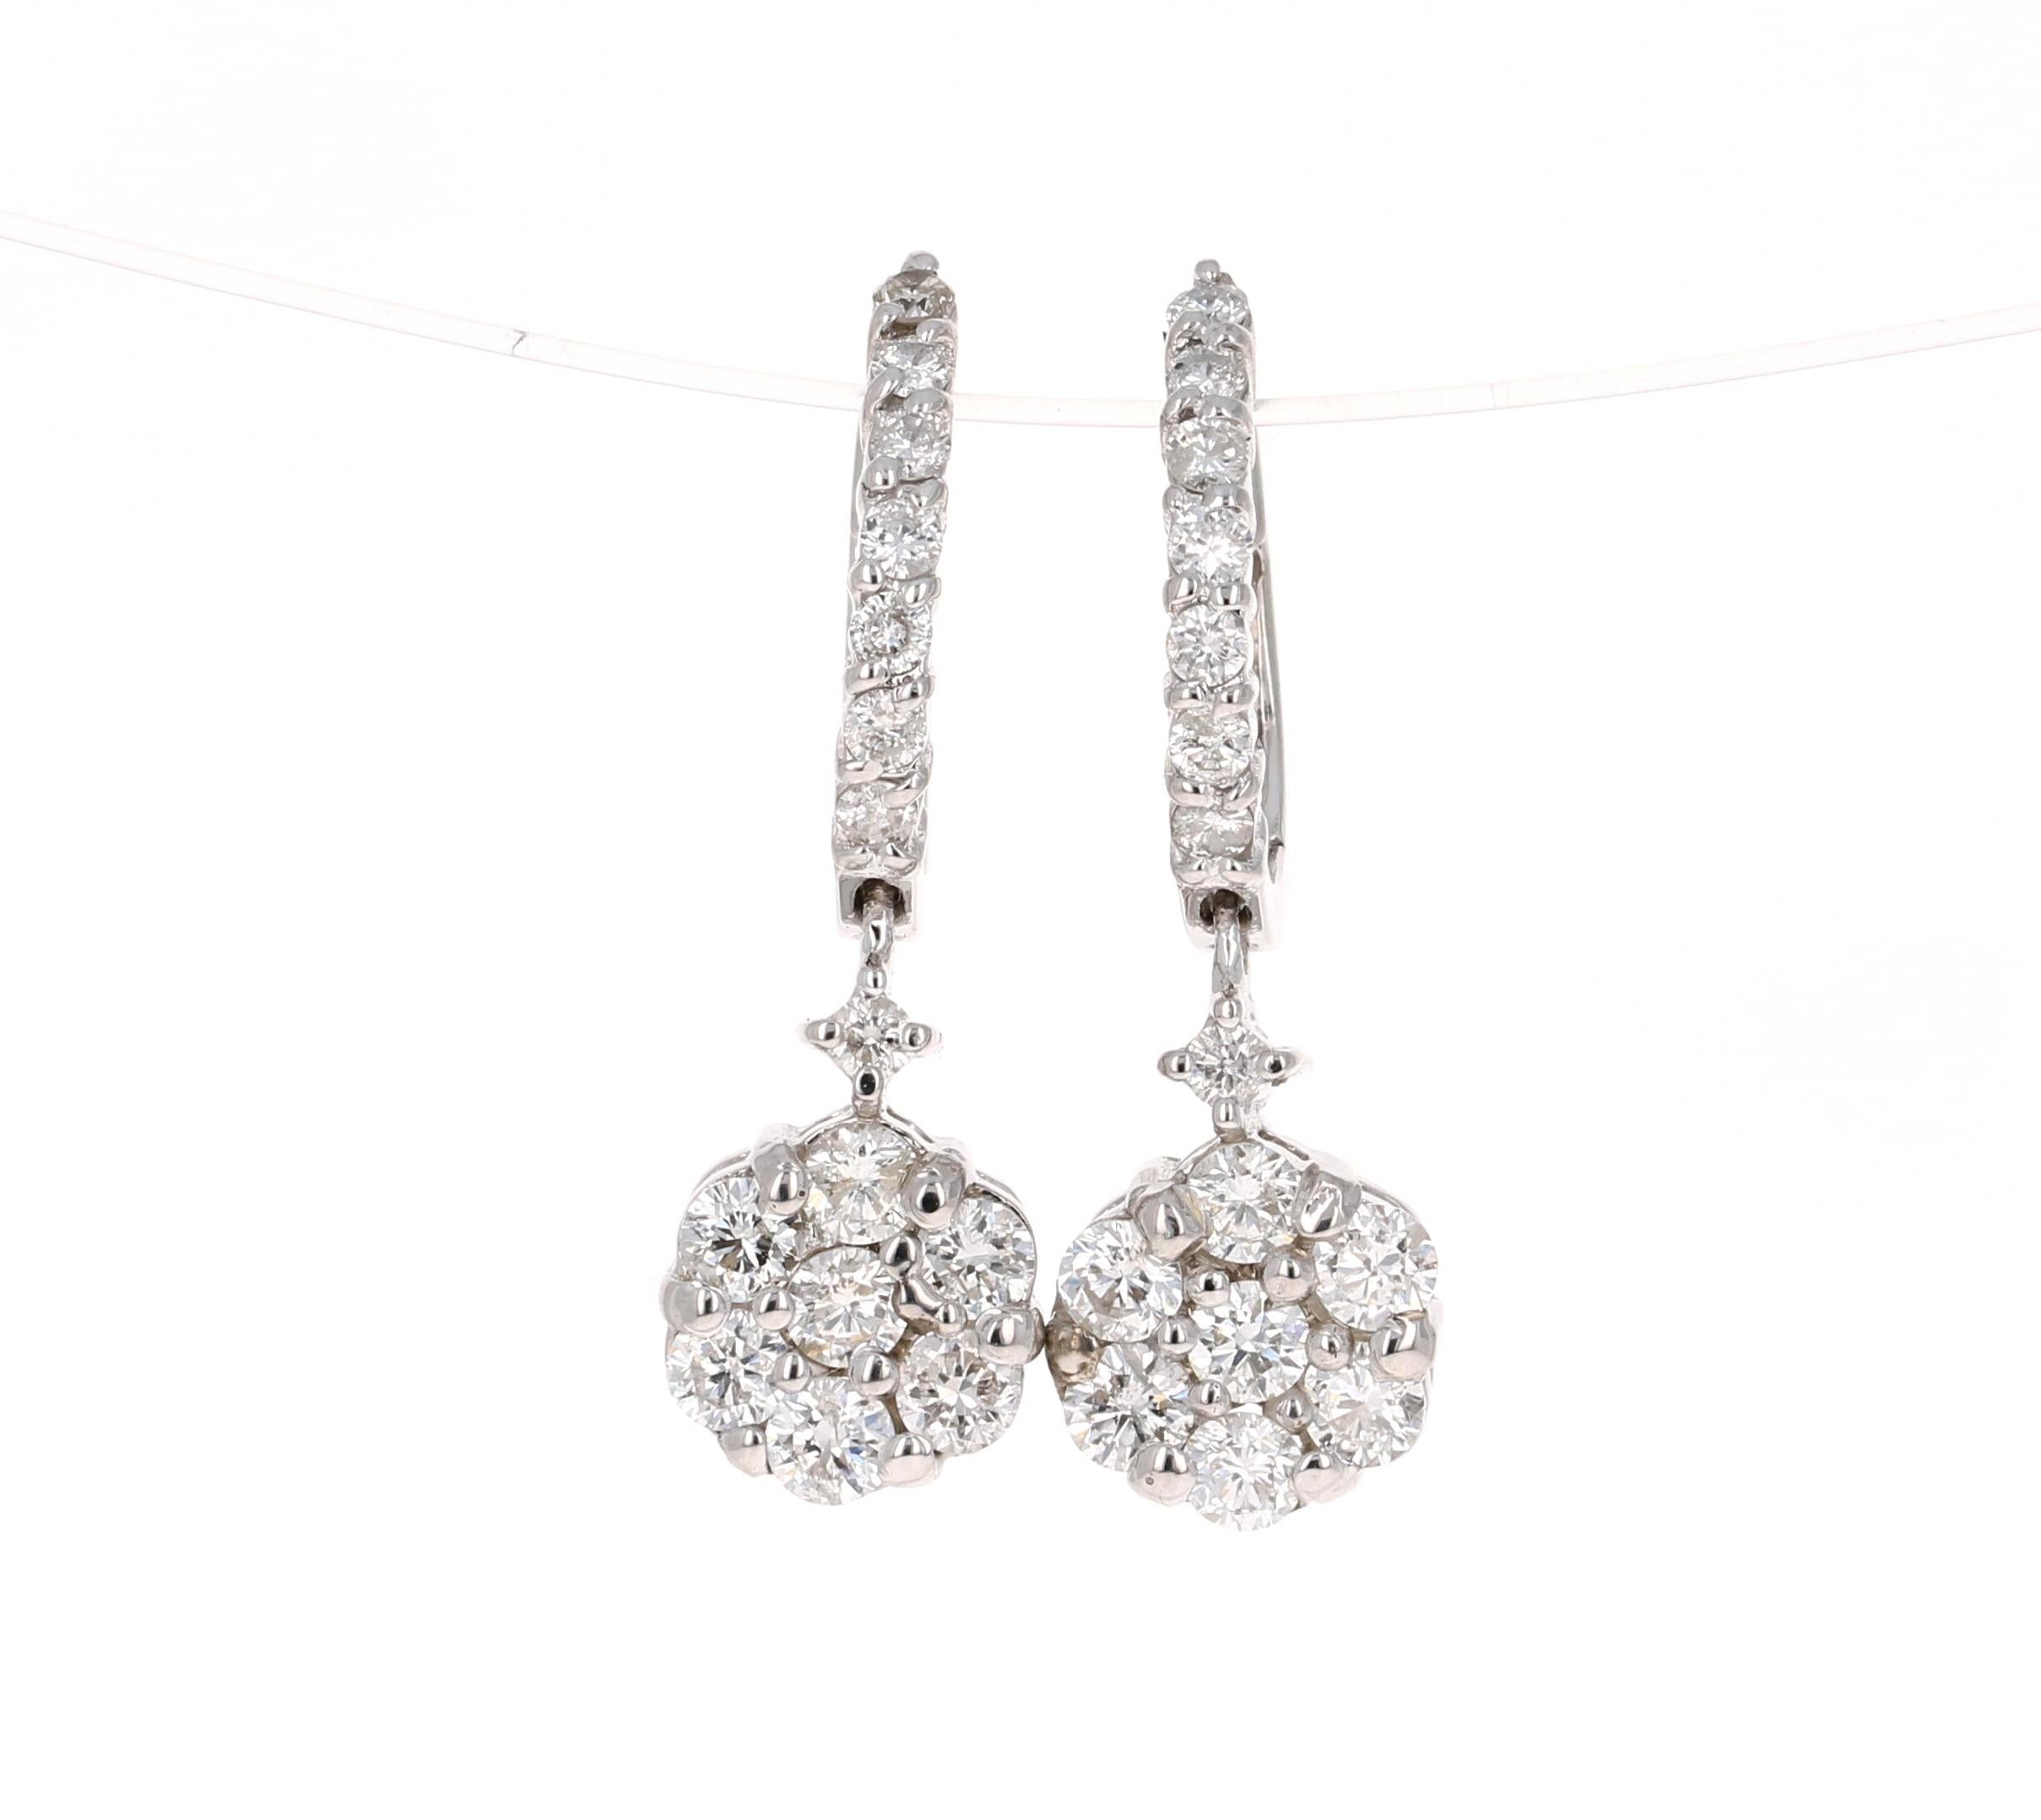 
0.72 Carat Round Diamond Floret Design 14K White Gold Earrings!

This classic design of diamond earrings have 28 Round Cut Diamonds that weigh 1.29 Carats. The Clarity of the diamonds is SI2 and the Color is F. The Earrings have a latch back